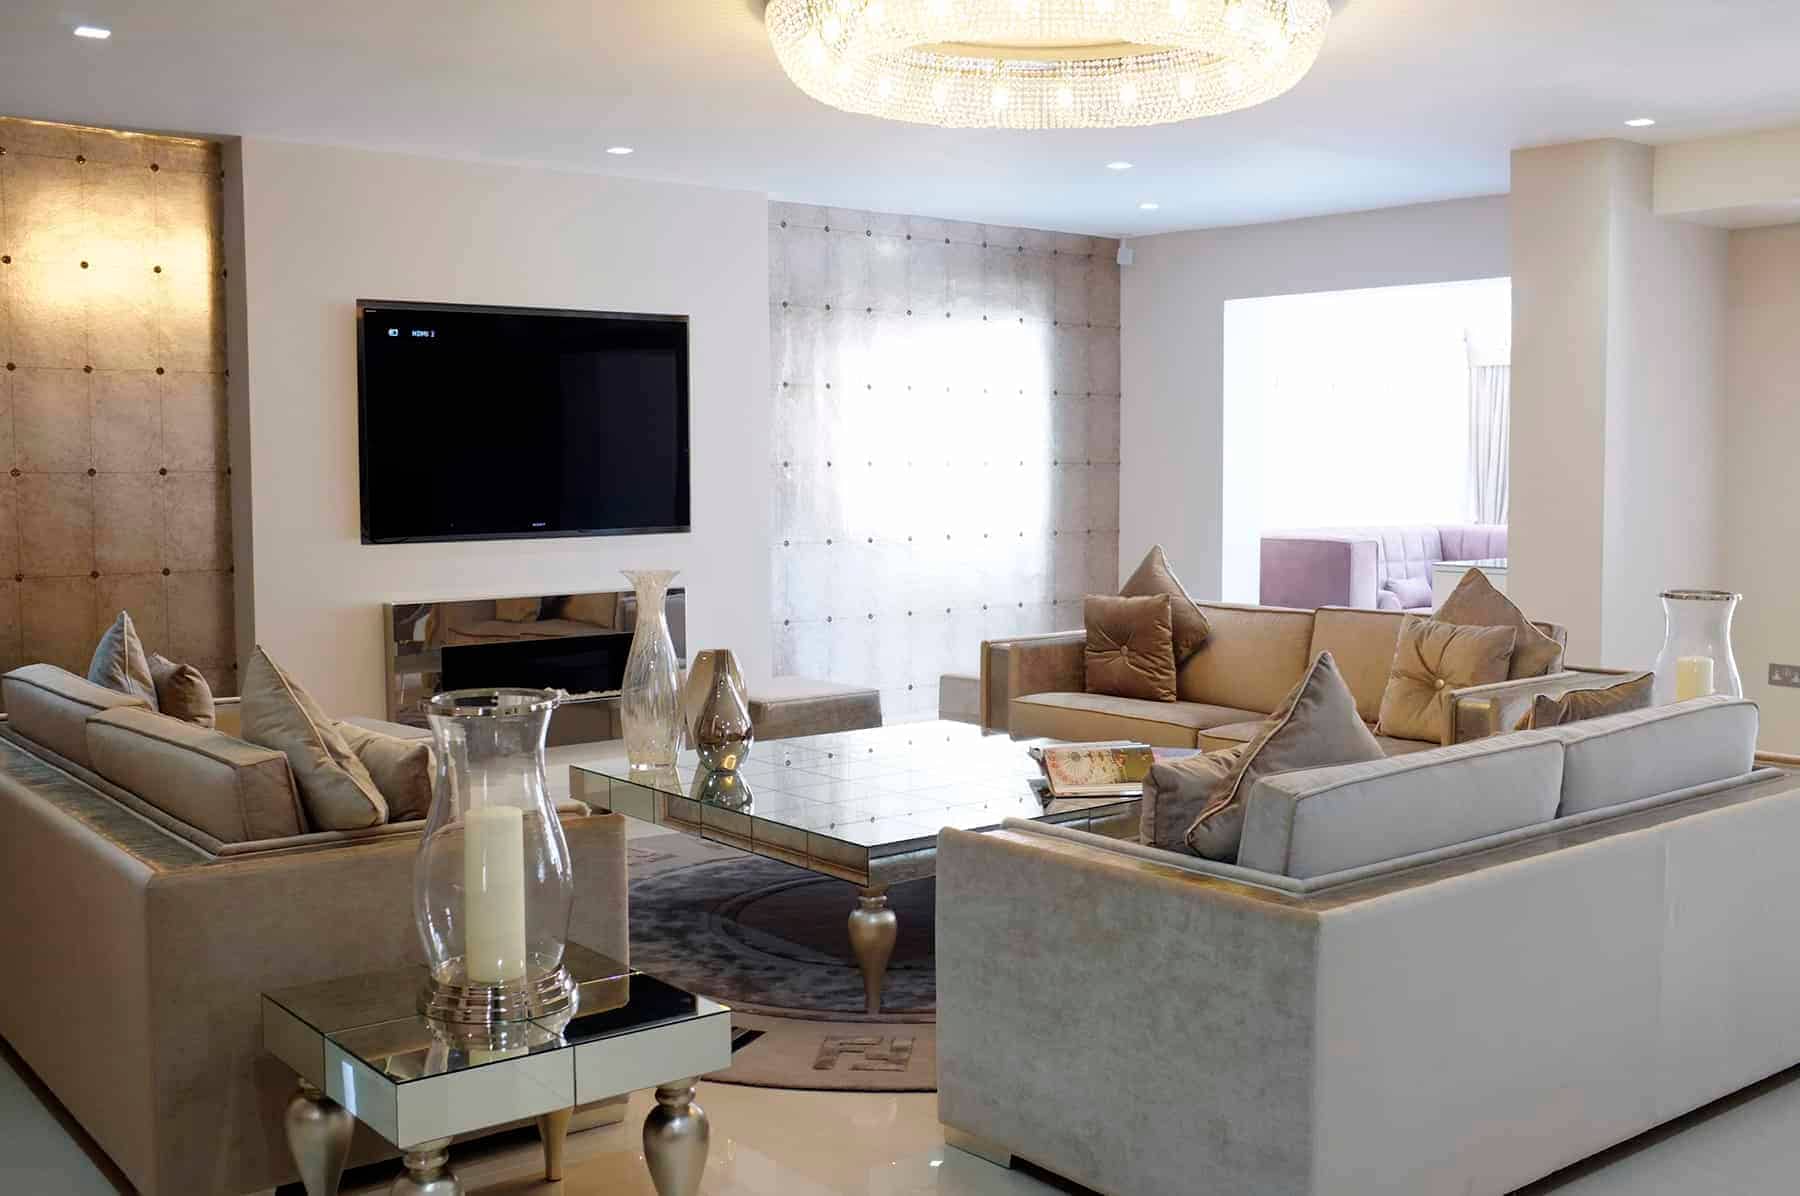 Formal Lounge with TV in an Interior Design Project in Ealing